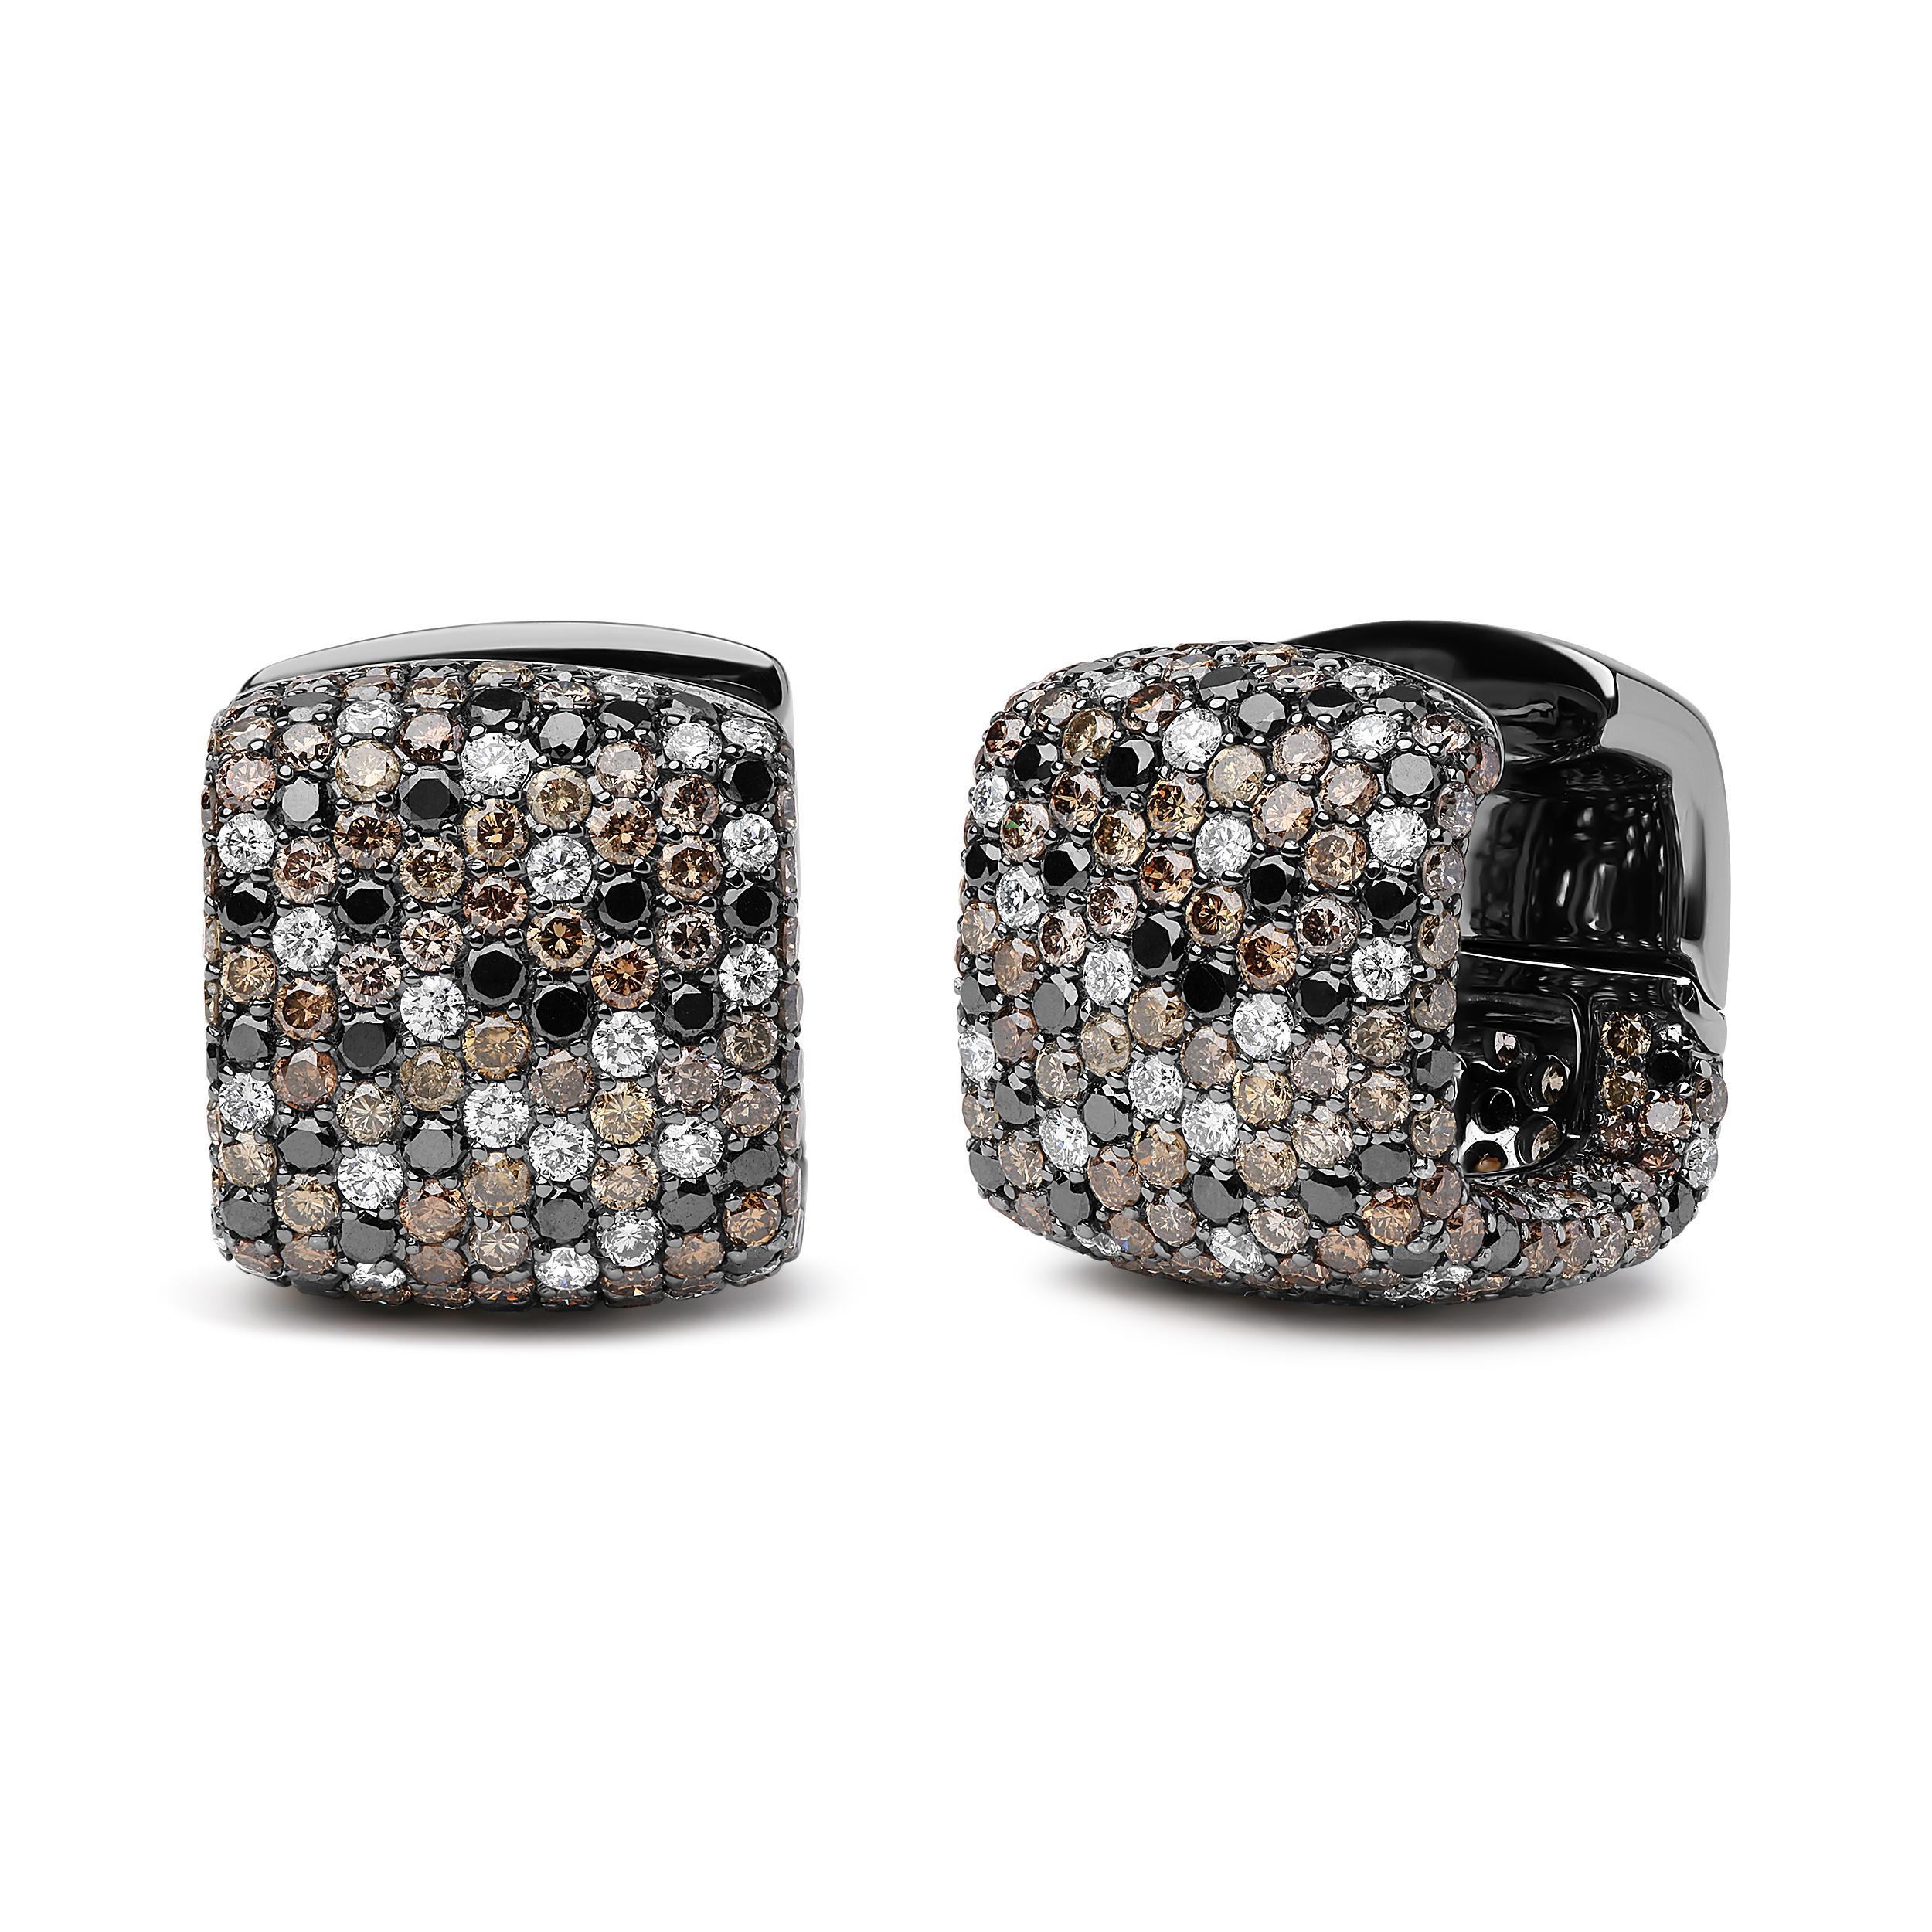 Enhanced by the rich splendor of black rhodium plated 18k white gold, these domed huggie hoop earrings are a style meant to be treasured. An impressive 596 total diamonds shine brilliantly from pave settings in an all-over cluster design so that